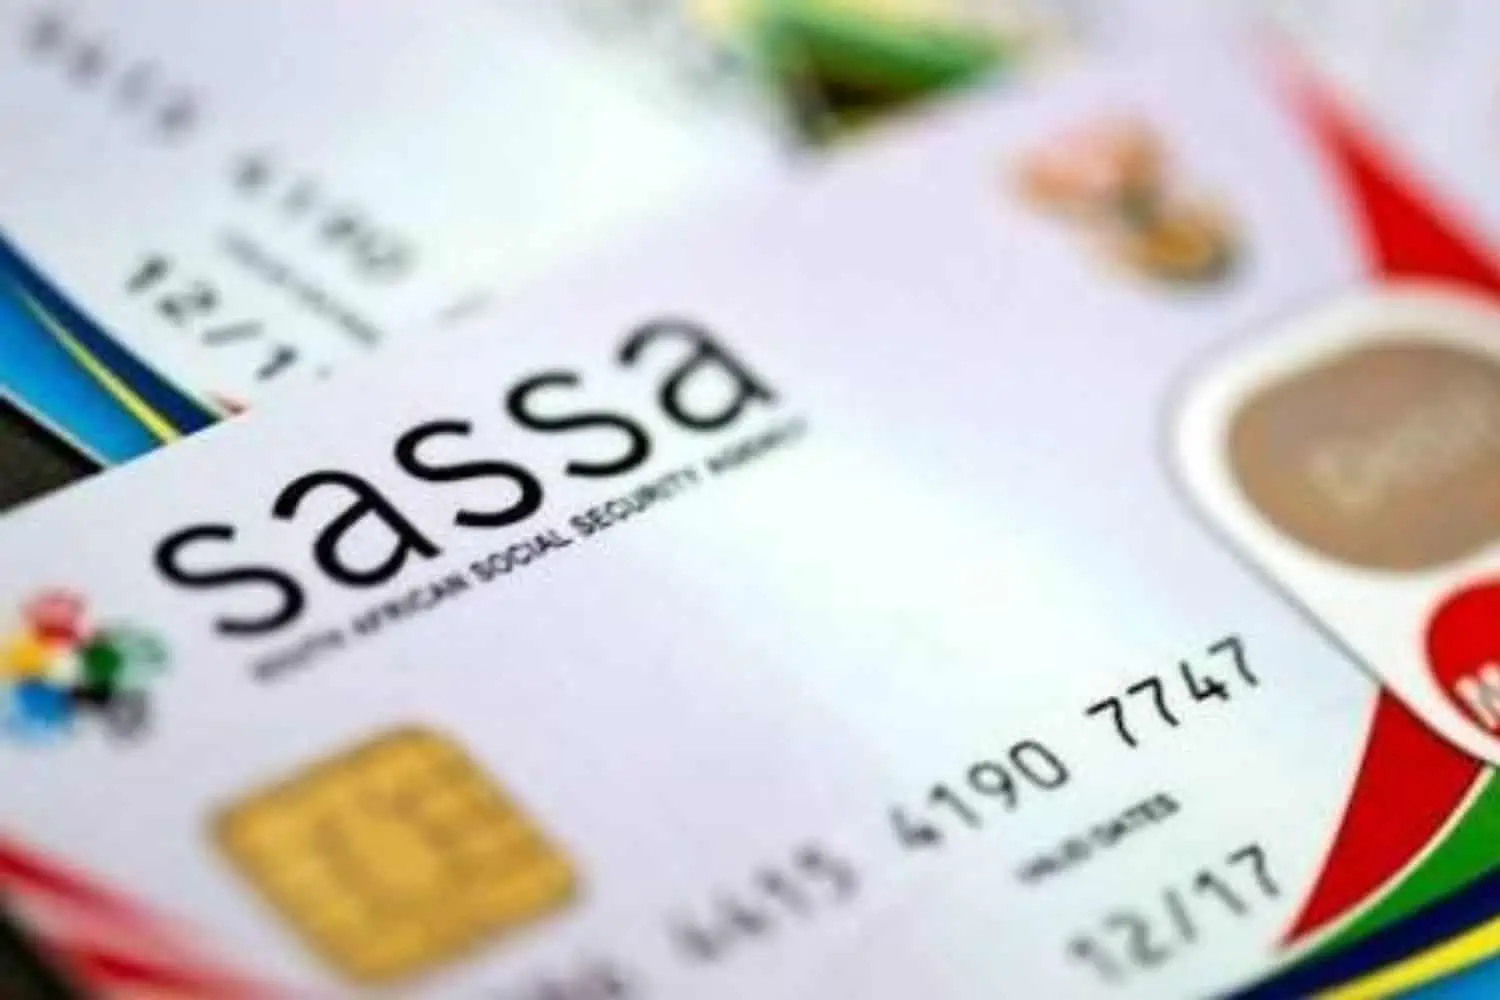 TODAY: South Africa's Top News for 18 February 2022 - SASSA's R350 grant costs taxpayers billions